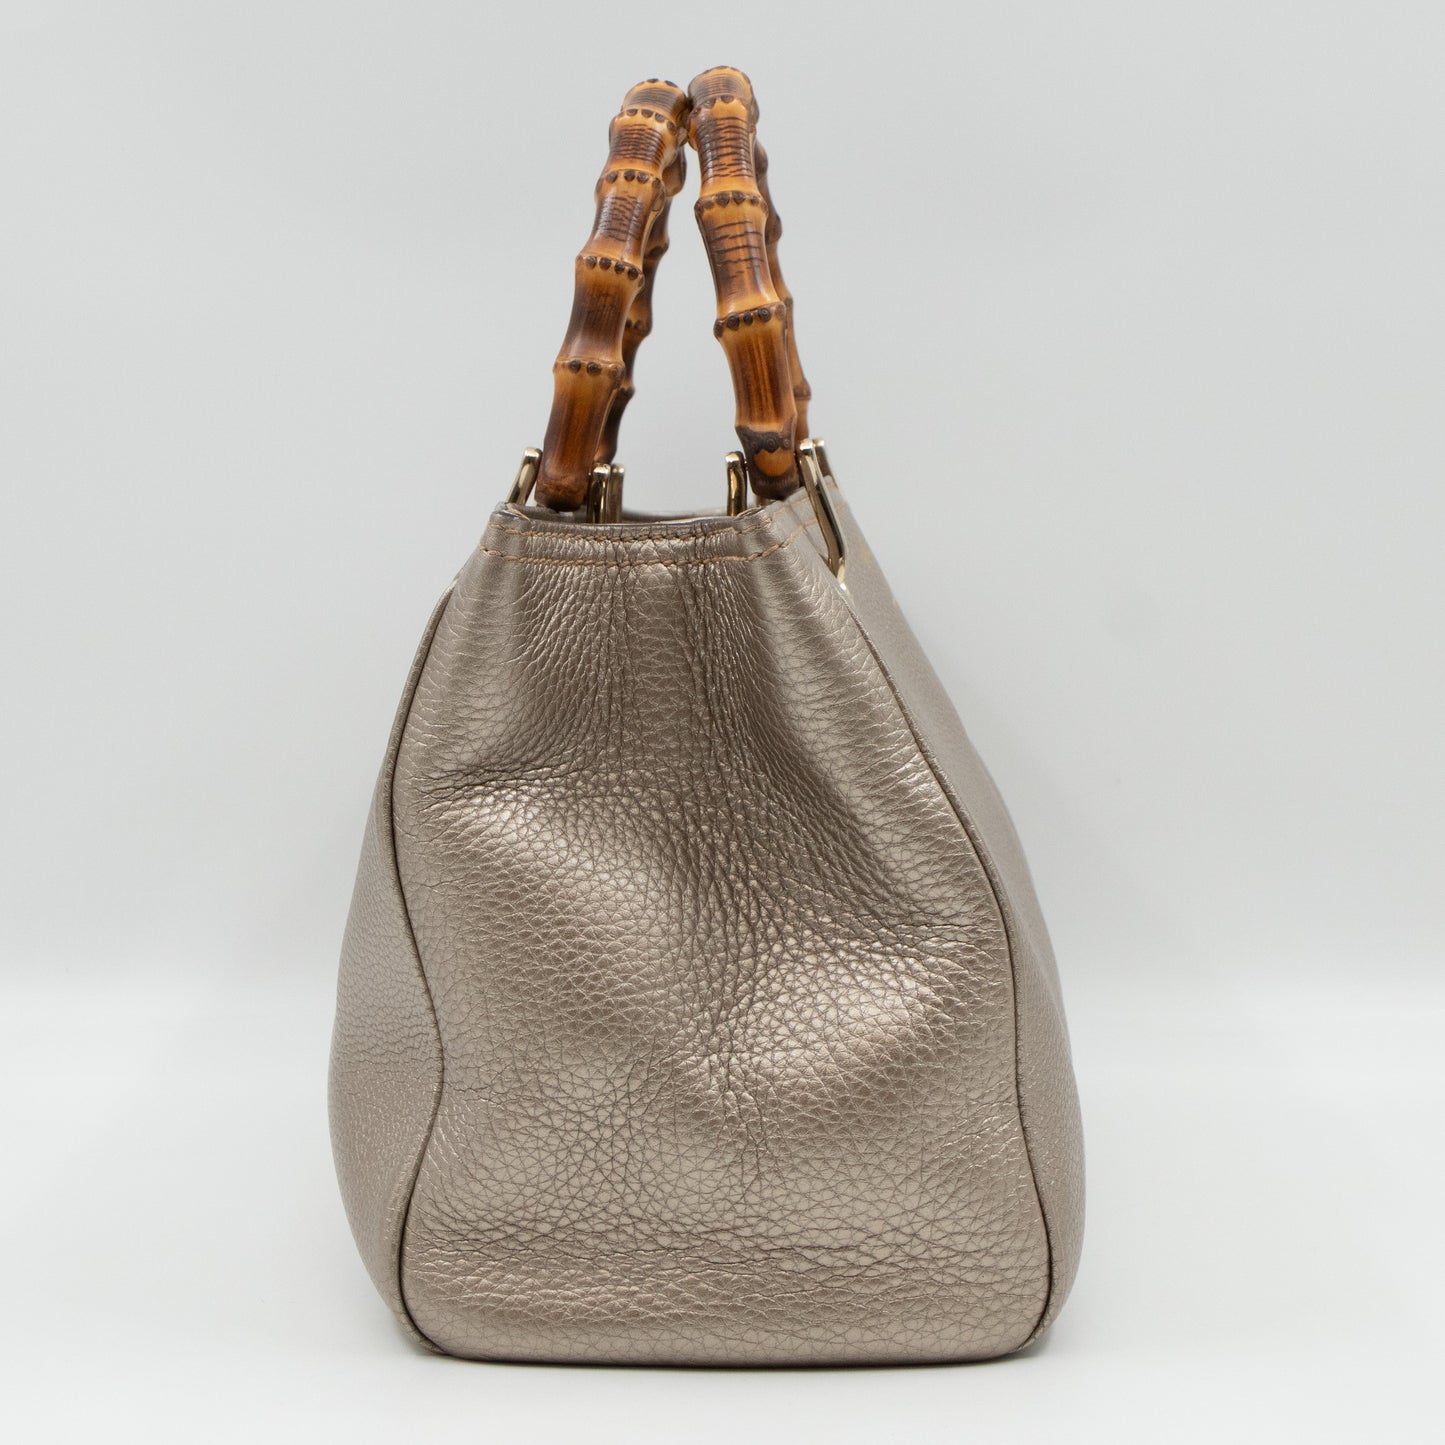 Bamboo Shopper Tote Champagne Leather